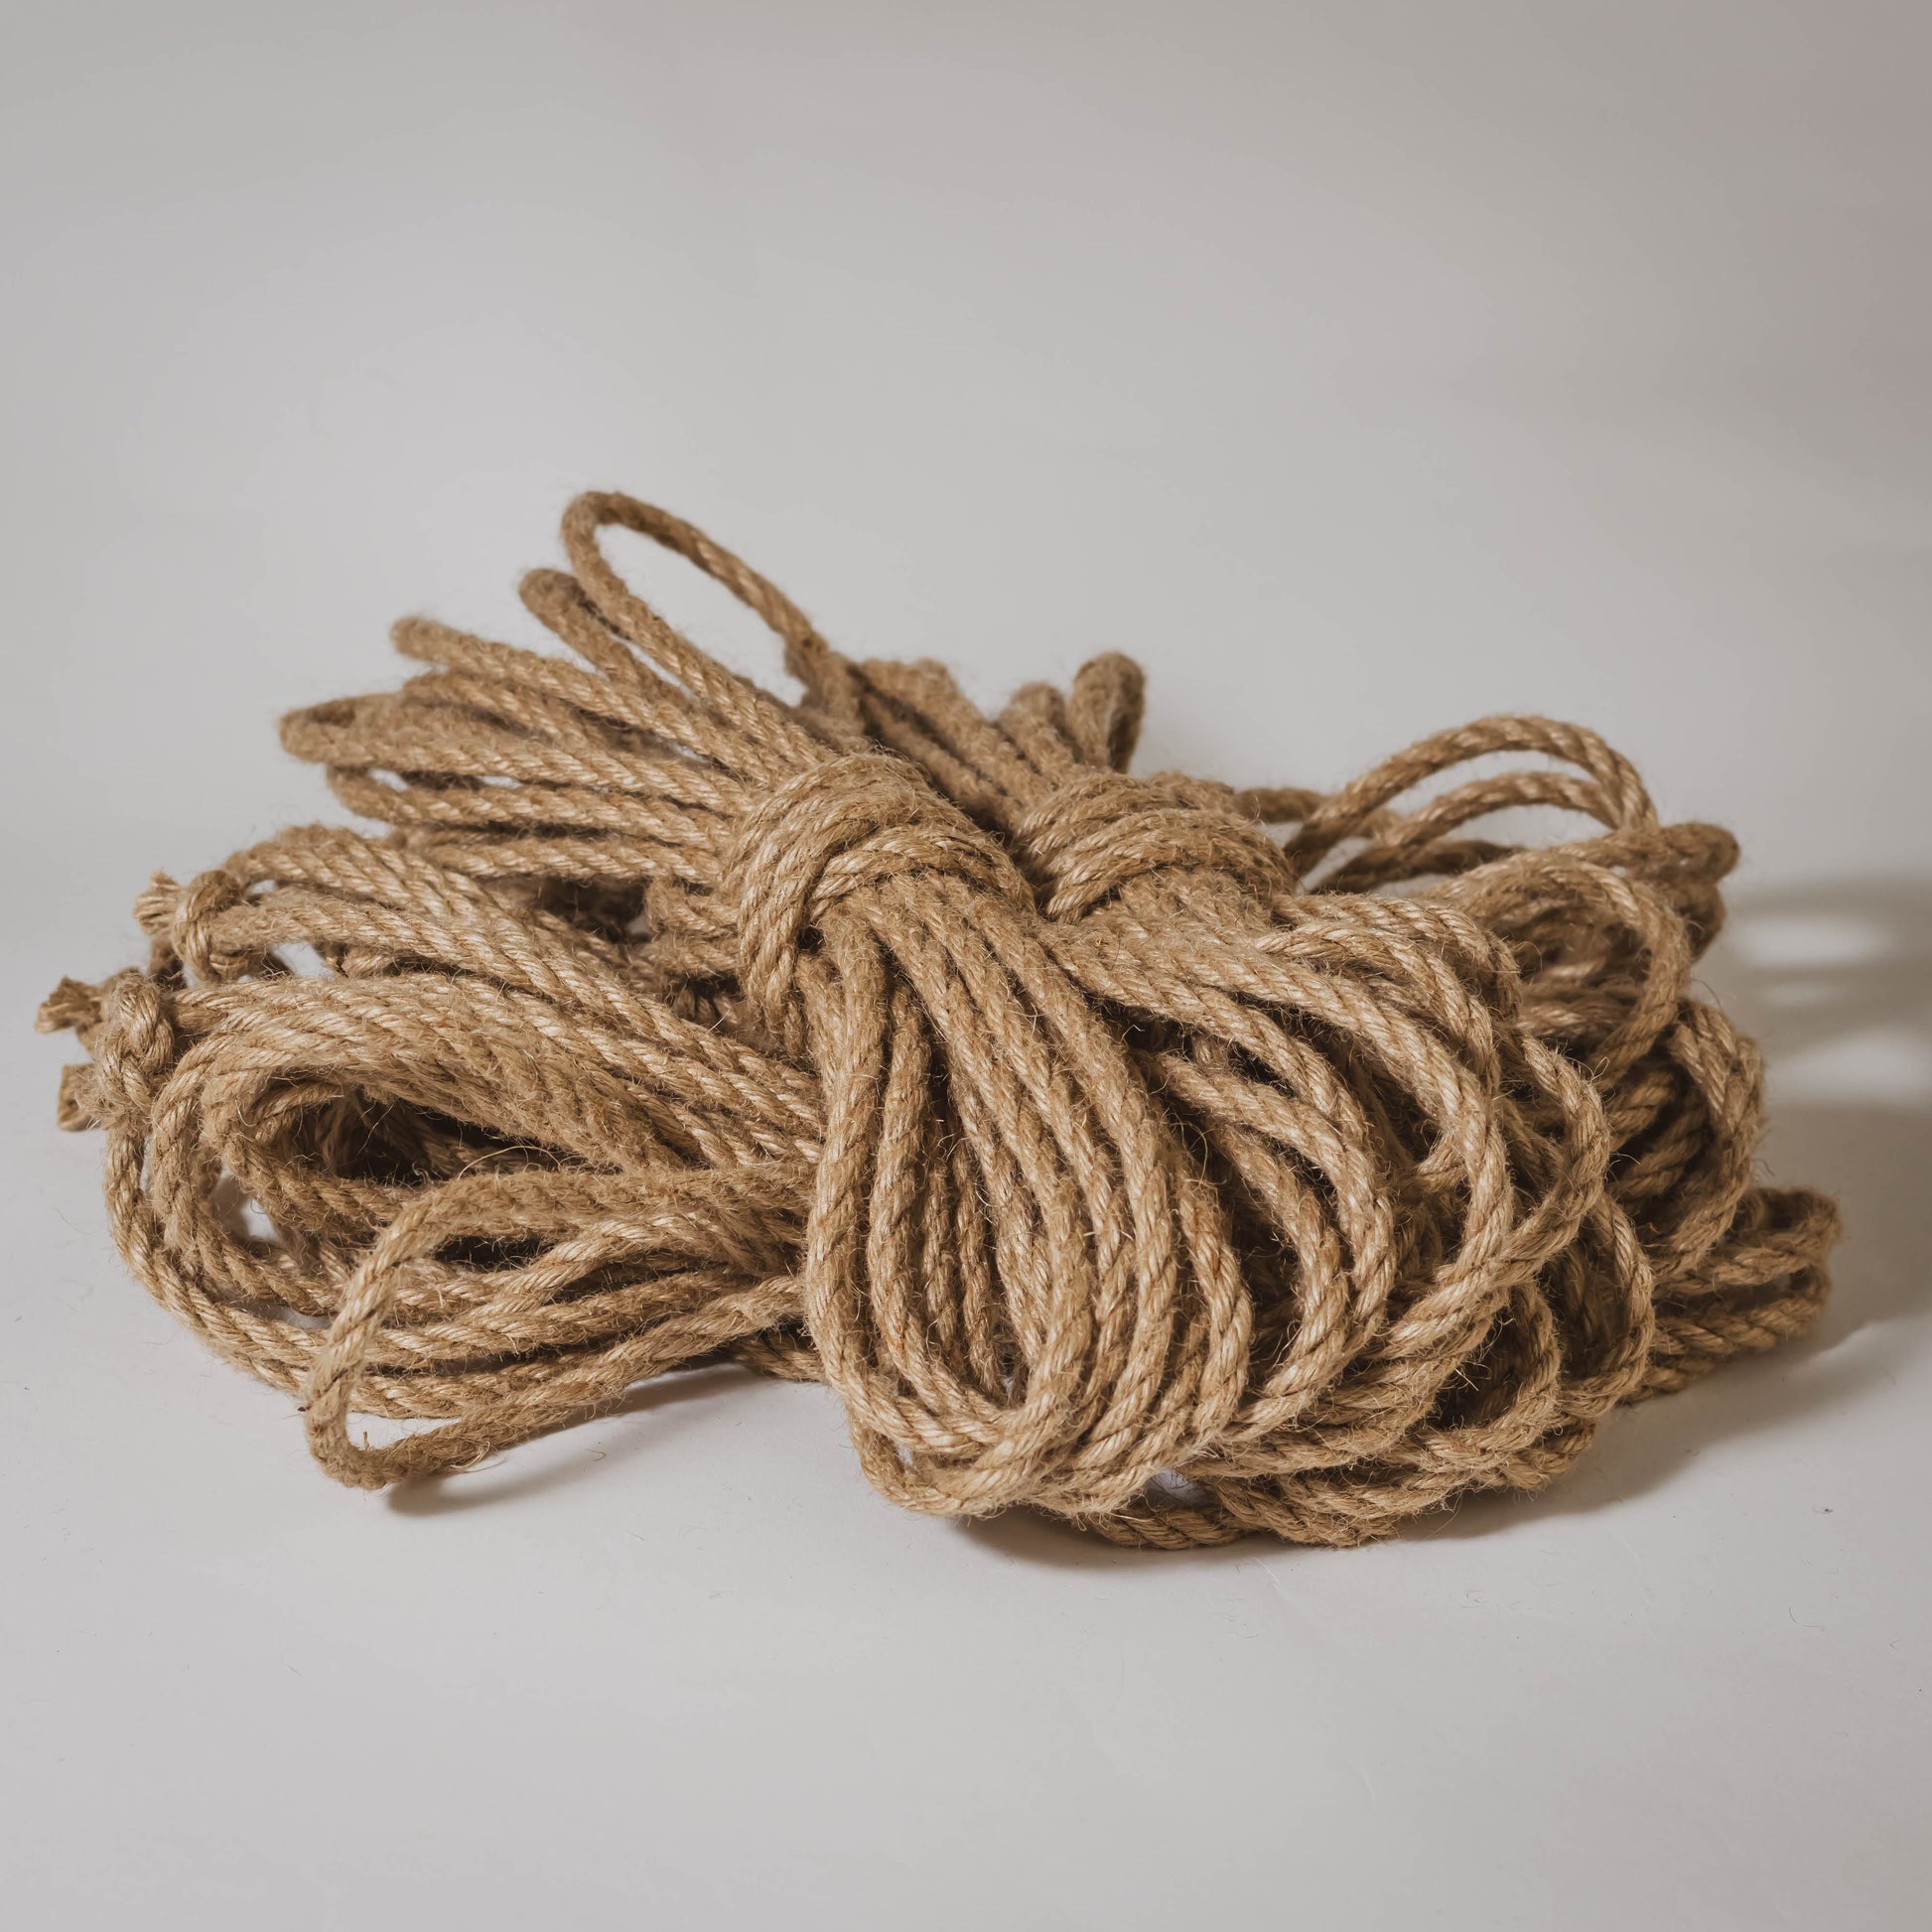 Jute rope, 6mm, and the marks it leaves on skin's surface. Photo